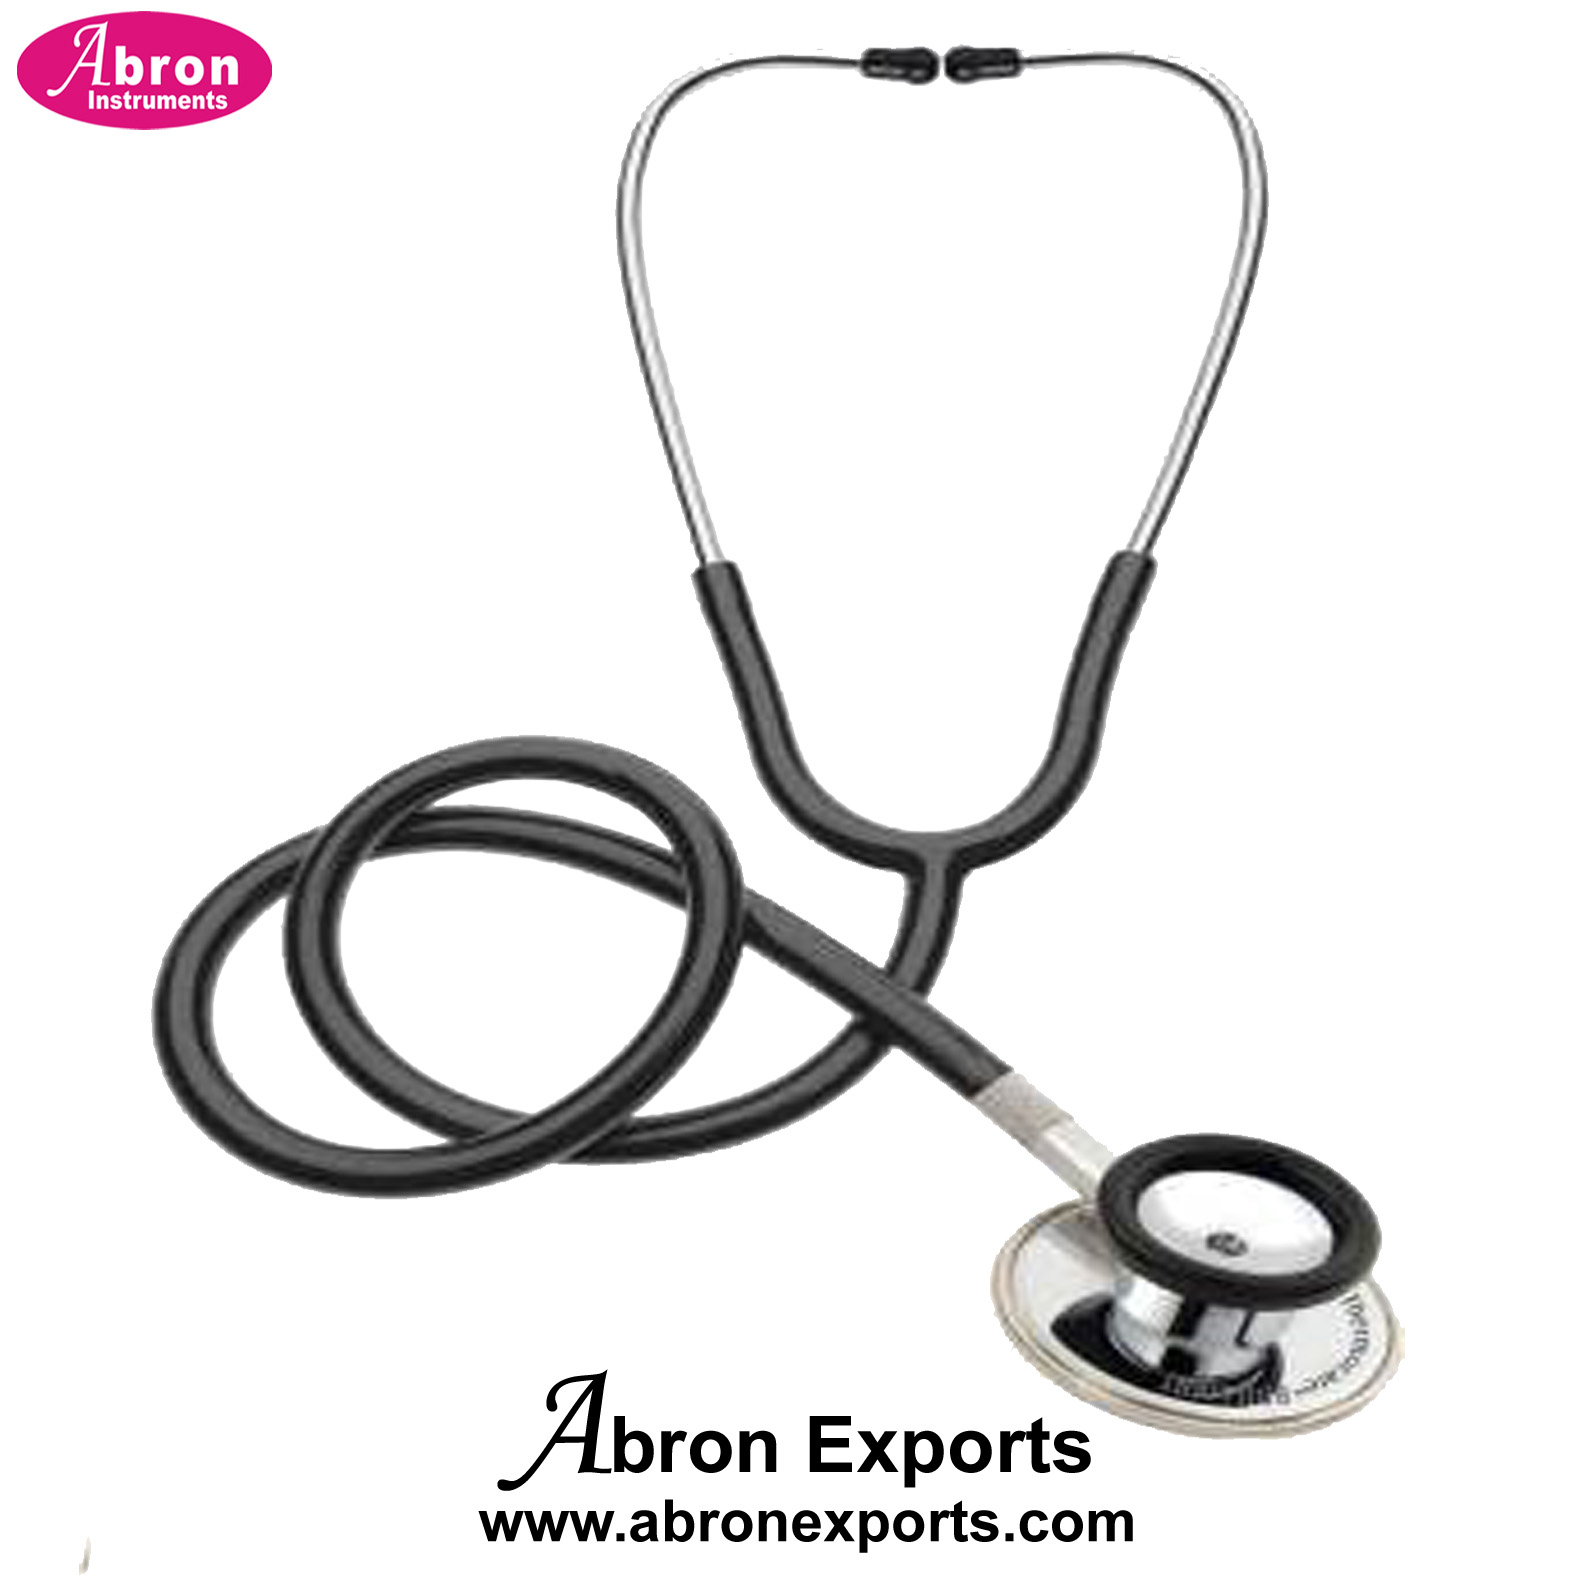 Stethoscope Aluminium Dual Head for doctors and Medical students light weight Chest Piece with Flexible Latex Free Tube & Soft Sealing Ear Knobs abron ABM-2751STCAAB-75CA